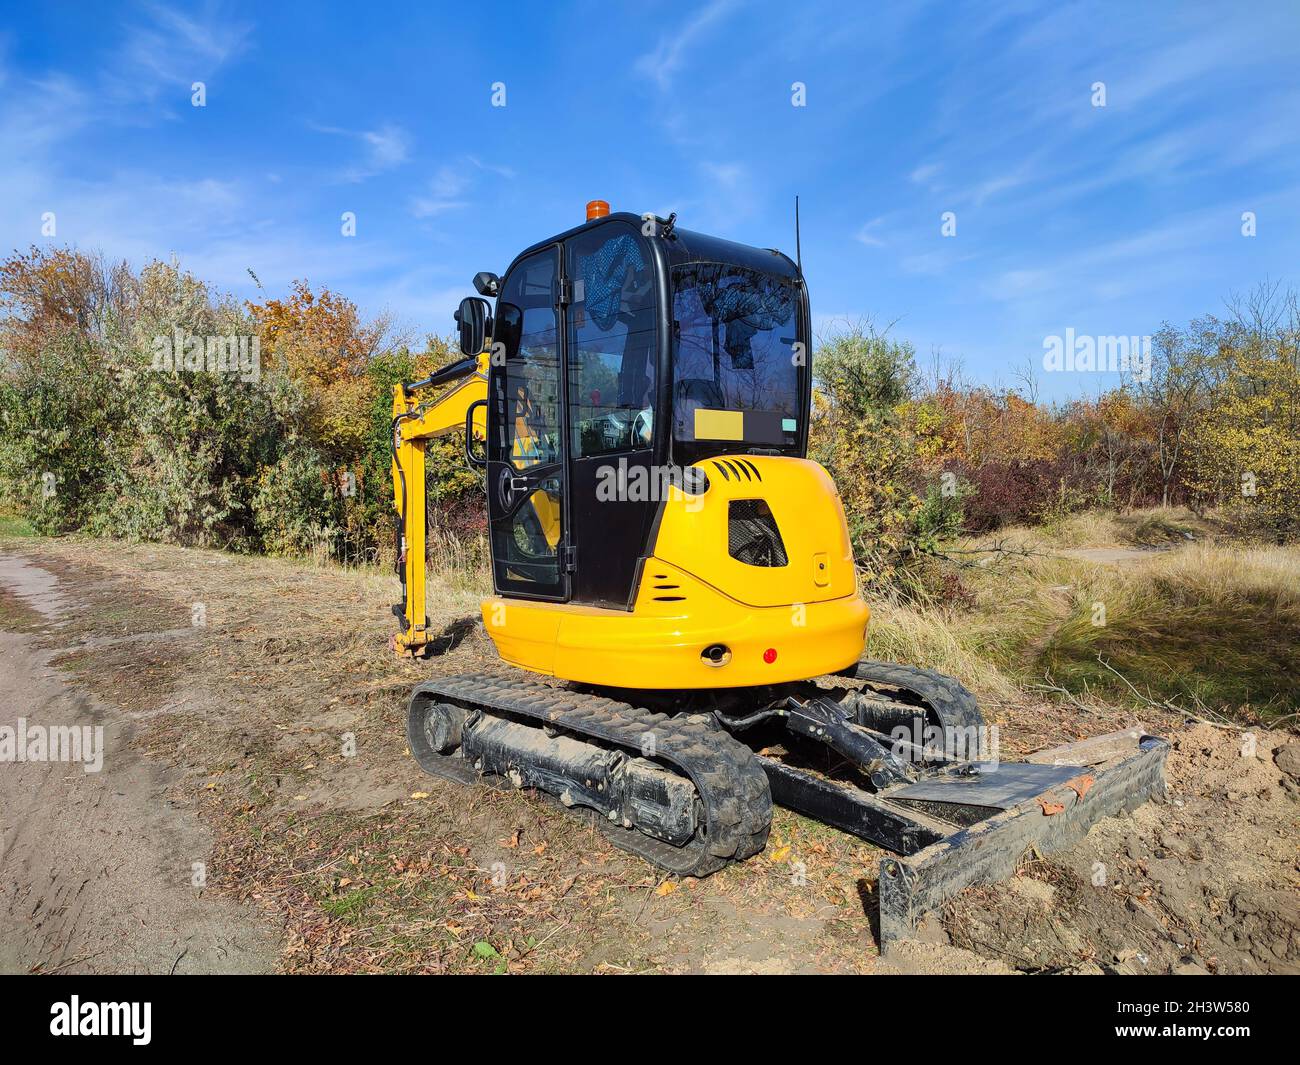 Modern yellow JCB mini digger or excavator performs excavation work outdoors Stock Photo